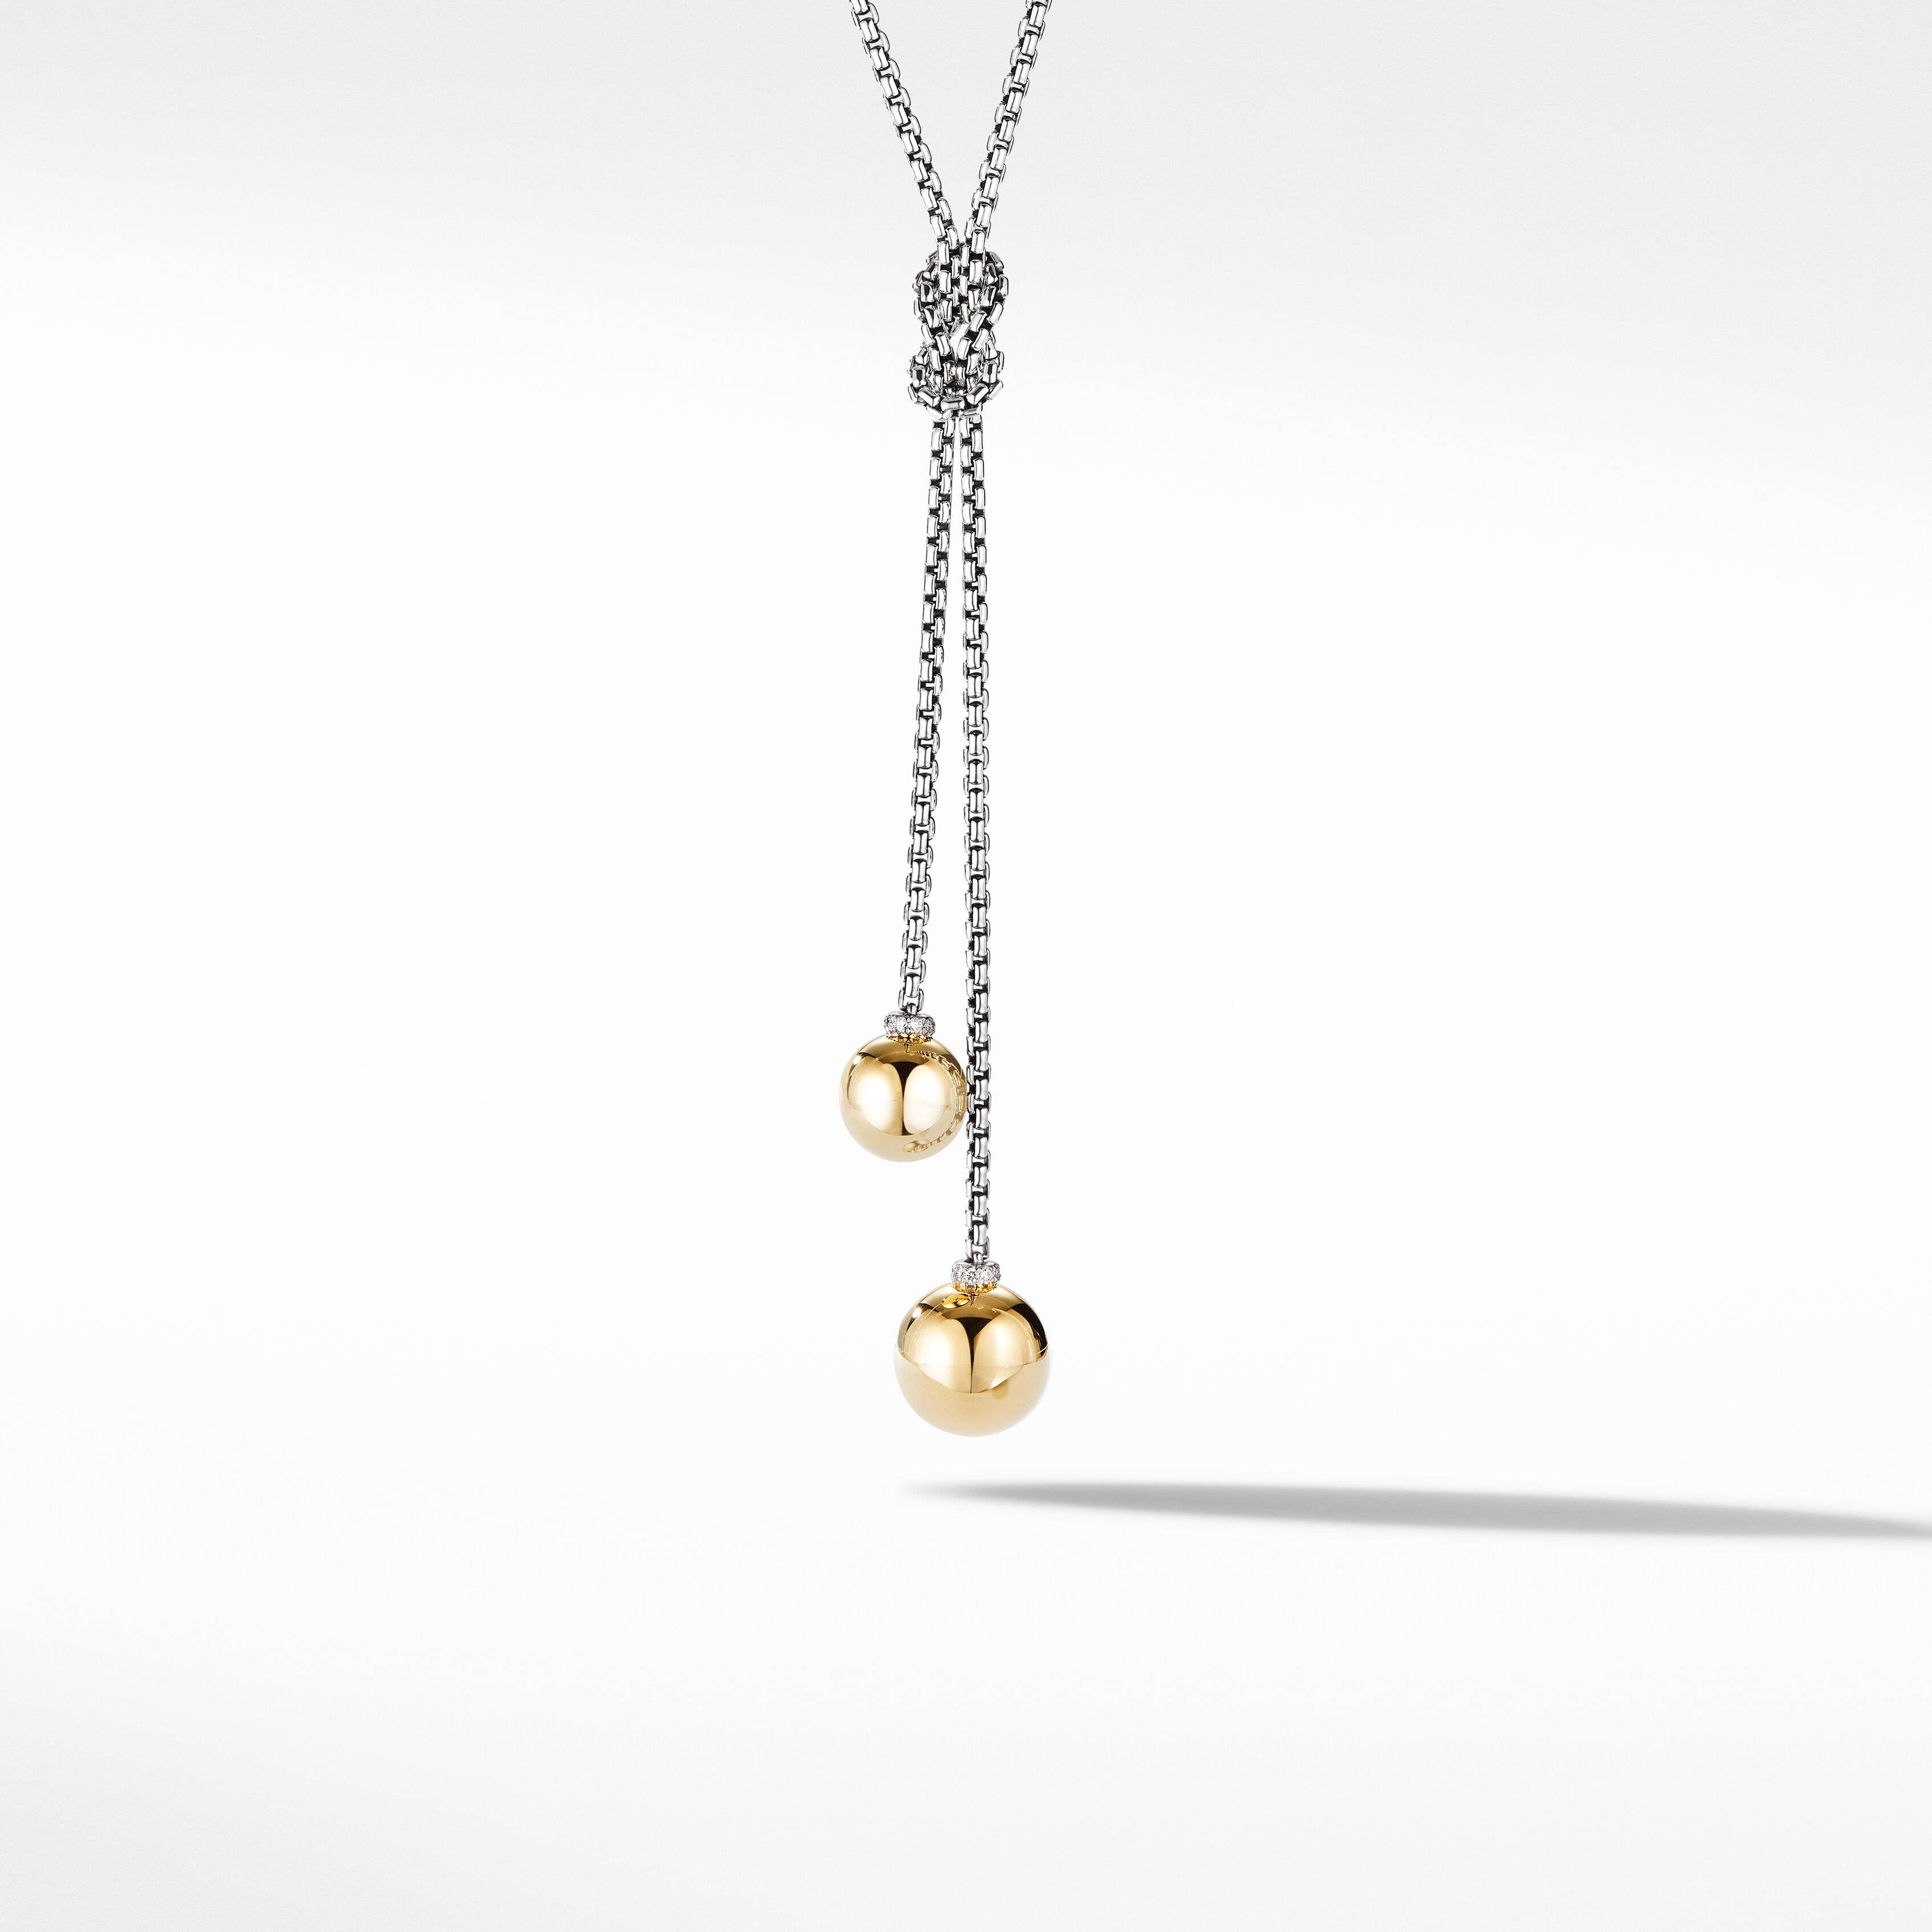 Solari Knot Necklace with 18K Yellow Gold and Diamonds